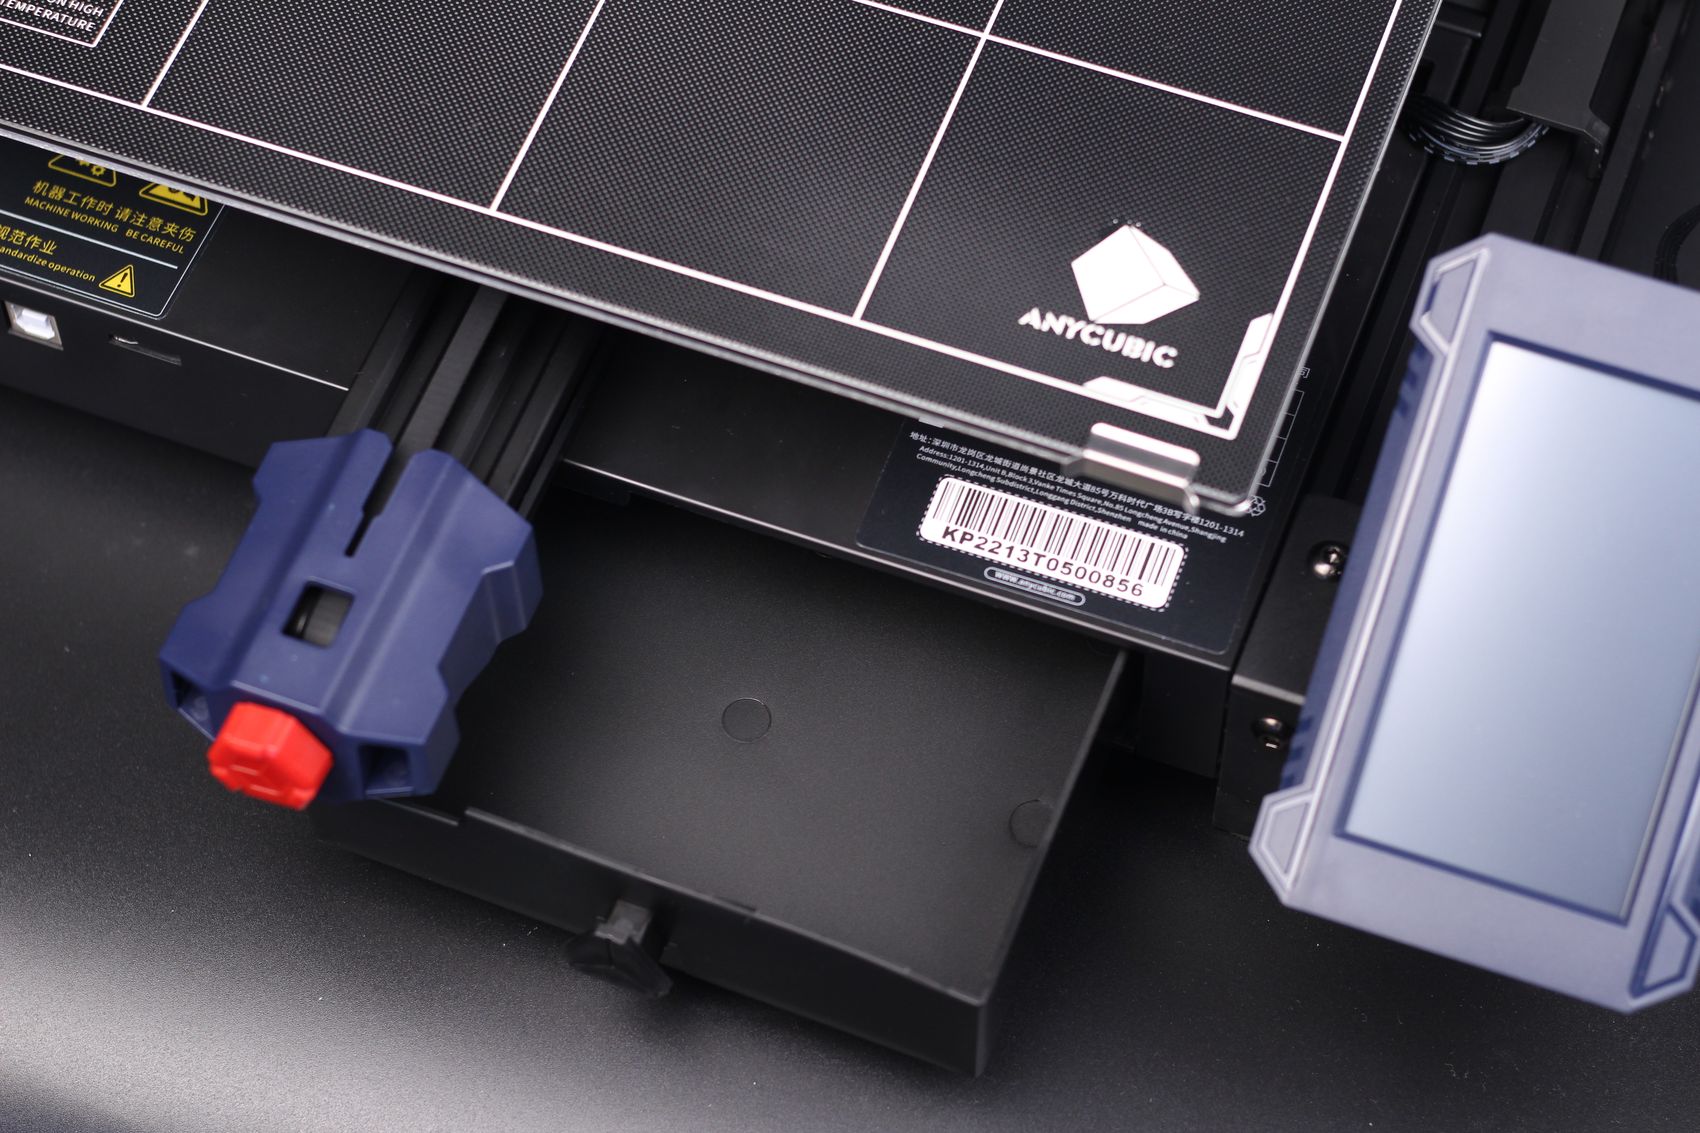 Integrated Tool Drawer on Kobra Plus | Anycubic Kobra Plus Review: A Larger Vyper